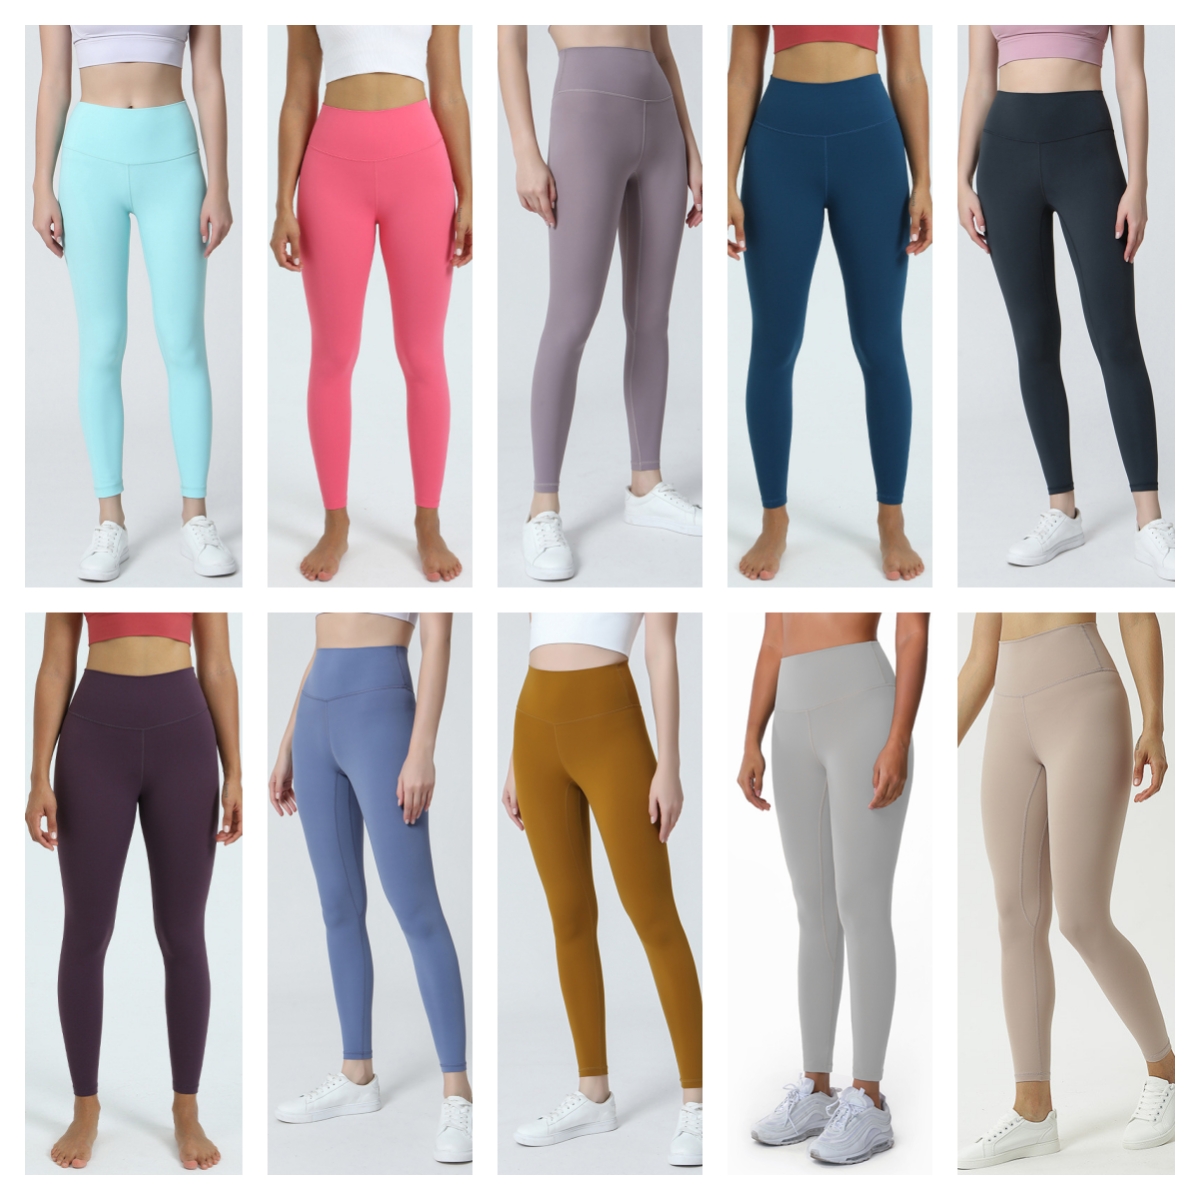 LL Women's All Day Soft Yoga Leggings Front Seam - Buttery Soft Workout Active Pants 7/8 Leggings for Women